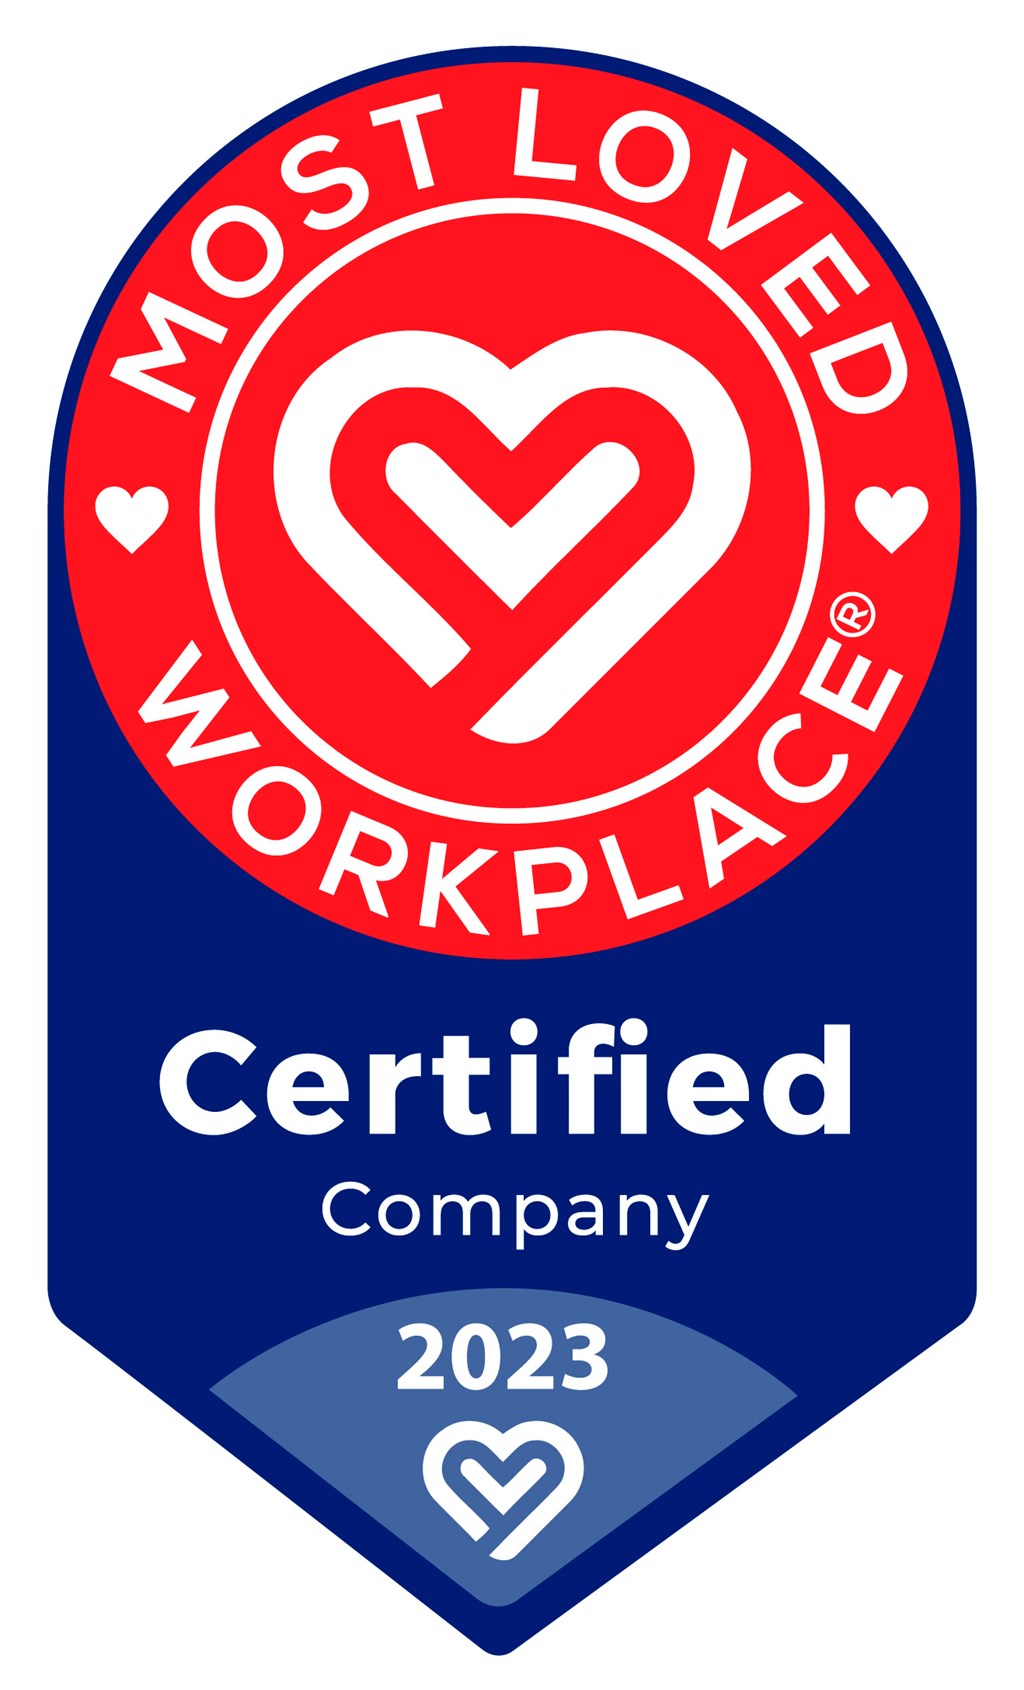 Ascom Certified as a Most Loved Workplace